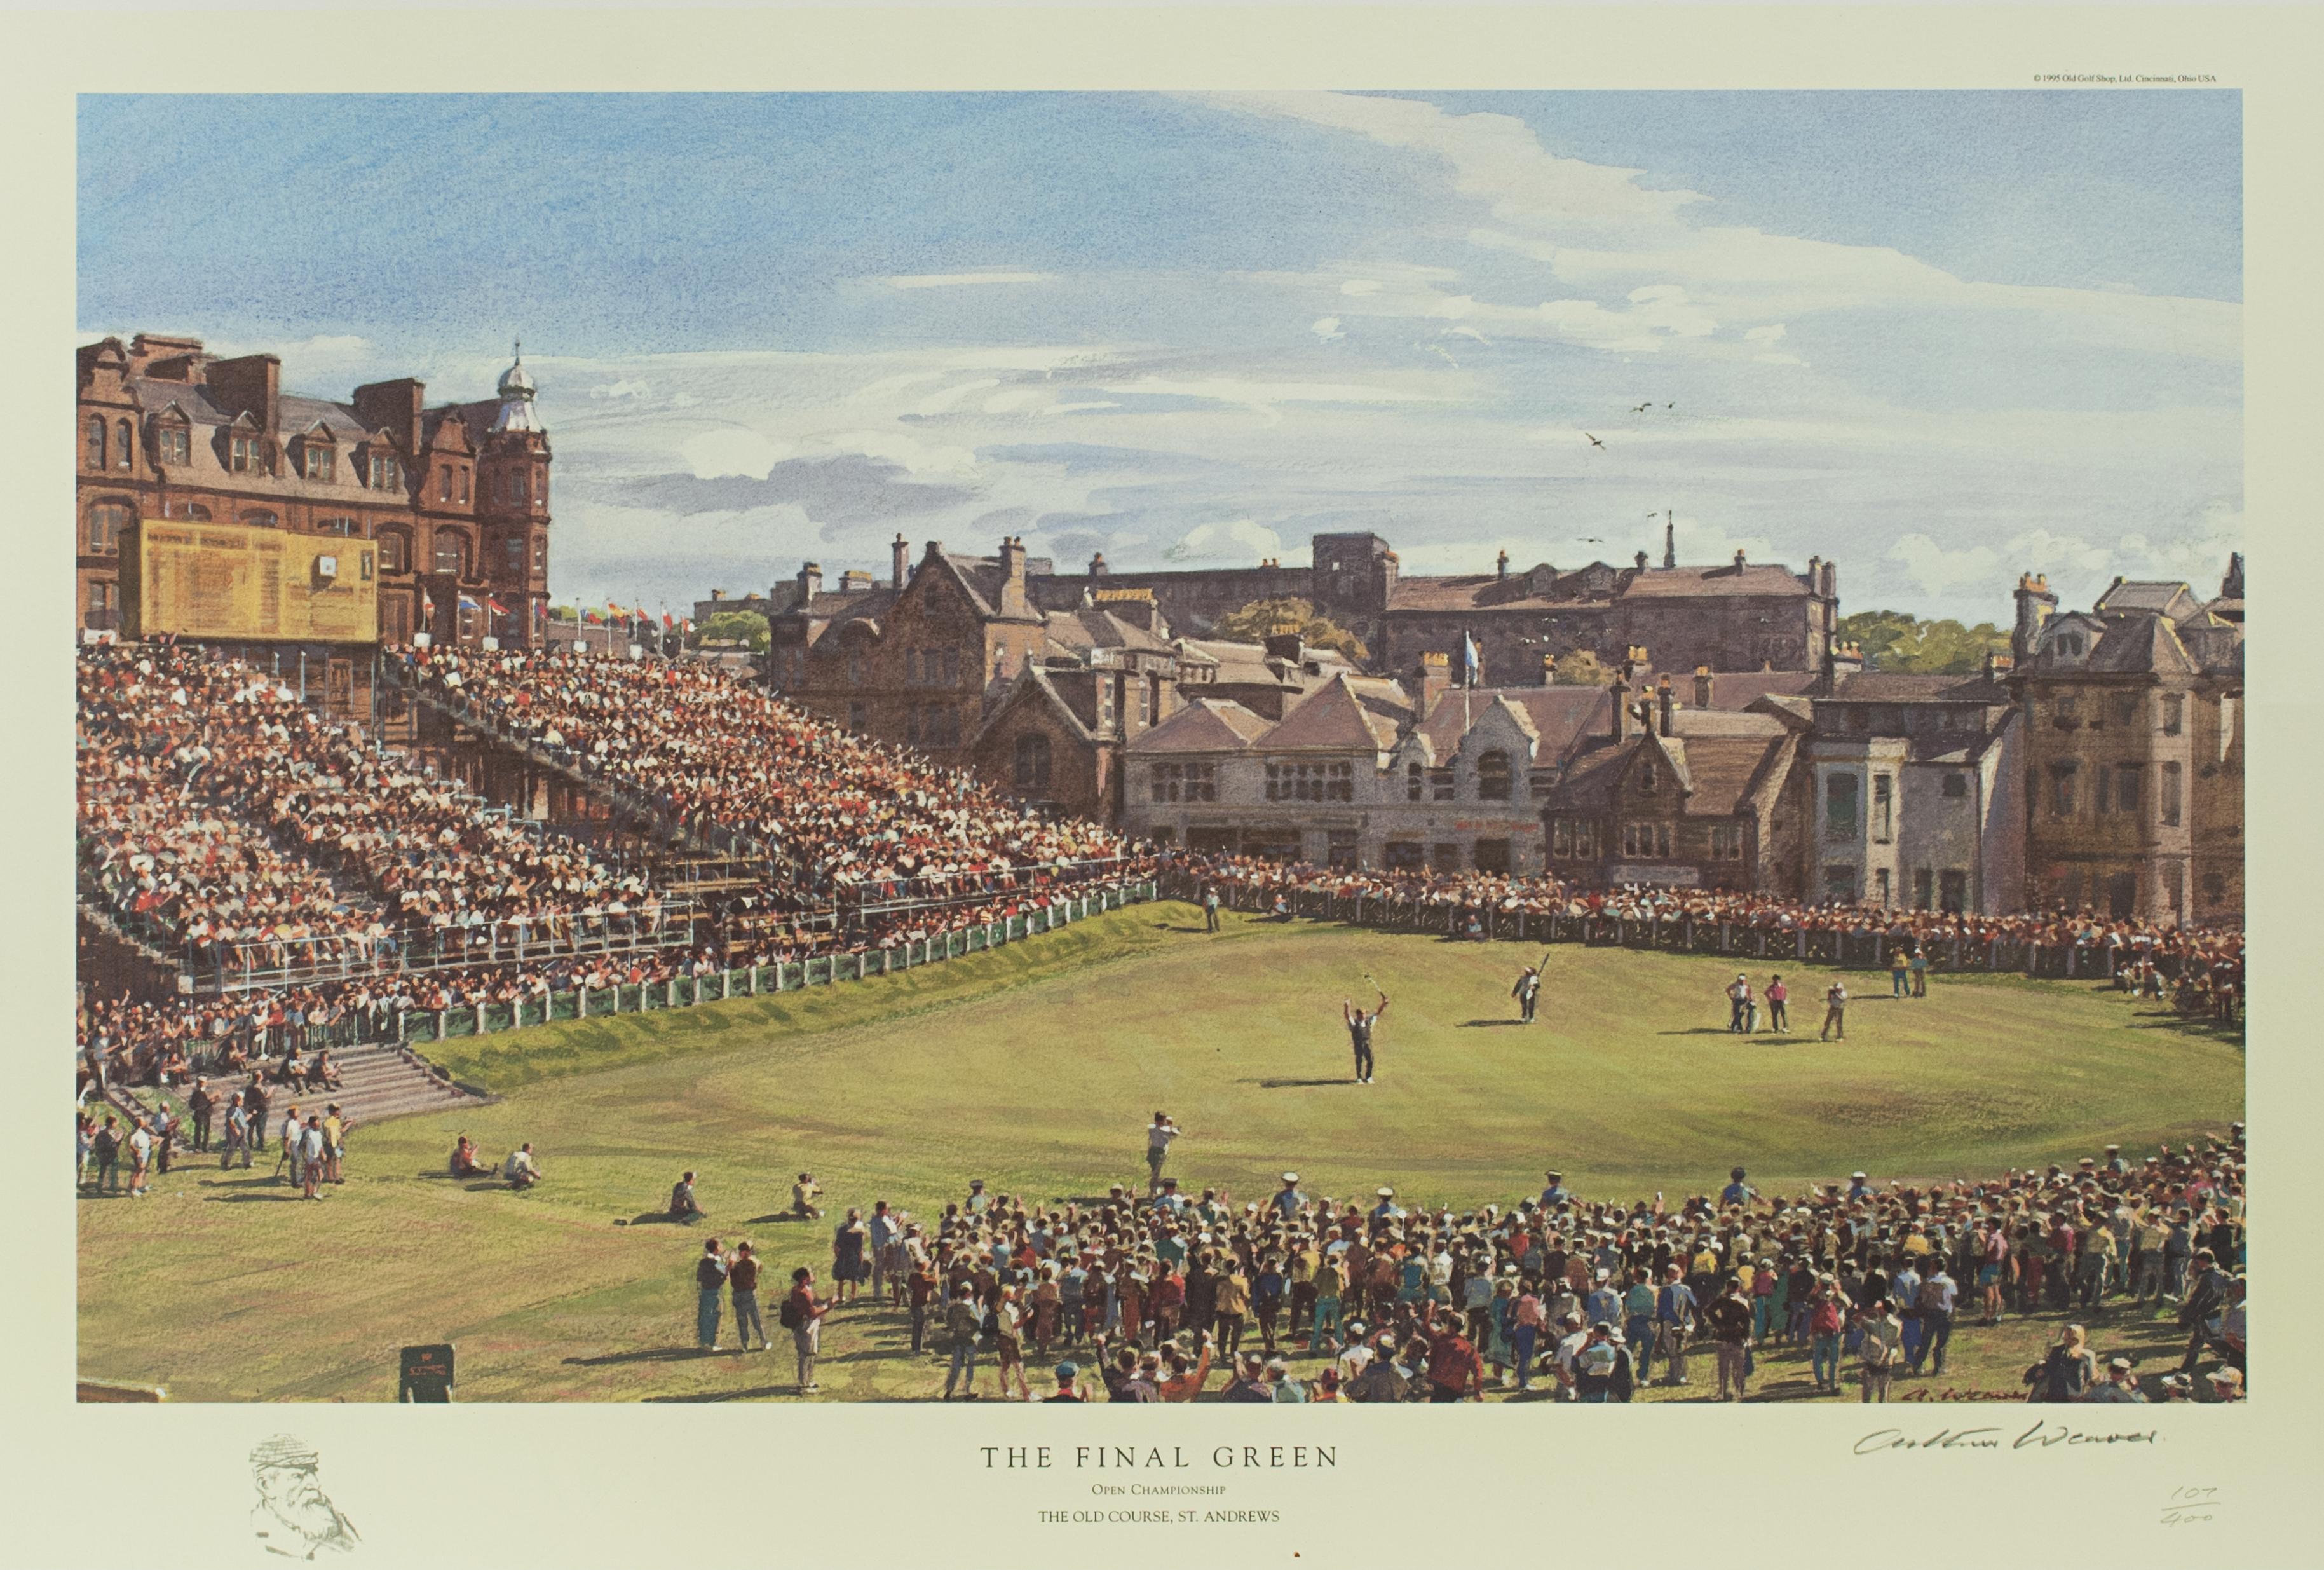 Arthur Weaver golf print, high hole, St Andrews.
A fine print taken from the original art work by Arthur Weaver, entitled 'The Final Green, Open Championship, The Old Course, St Andrews'. The print is a limited edition, this is No. 107 of 400.